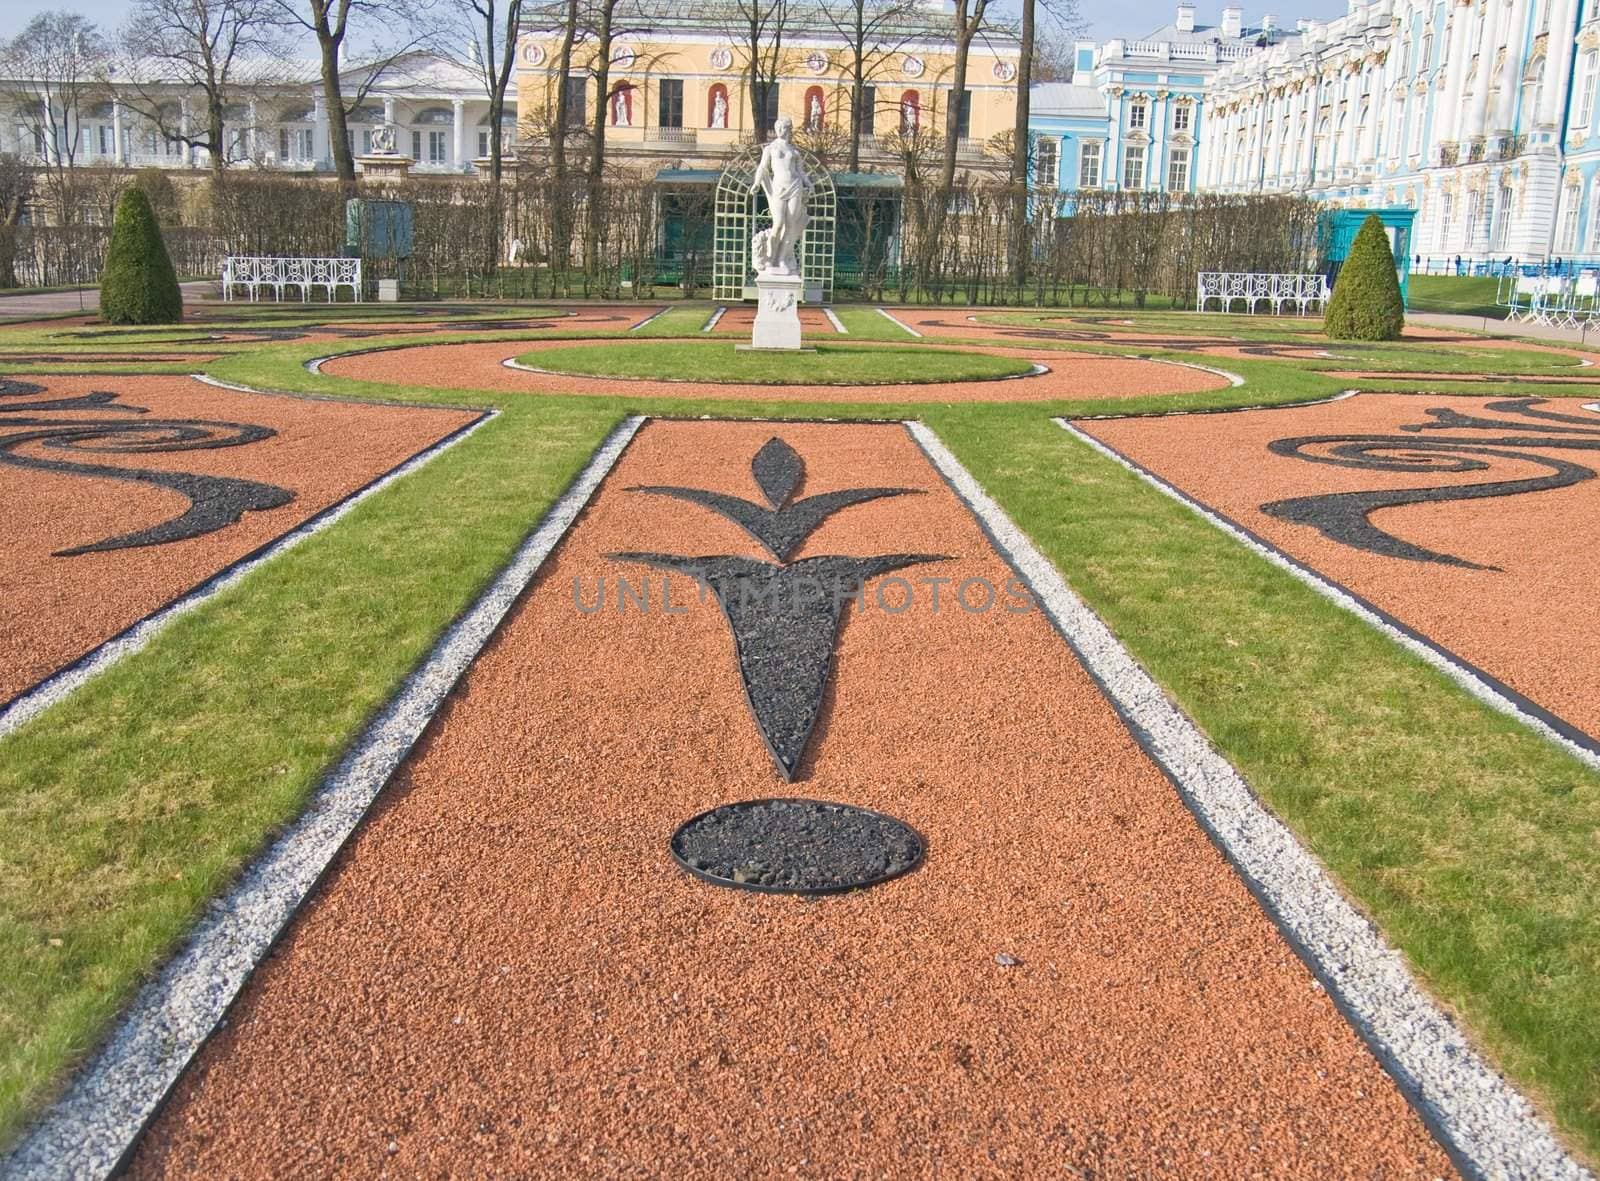 Decorative flower-bed in park of Pushkin, a famous town near St-Petersburg